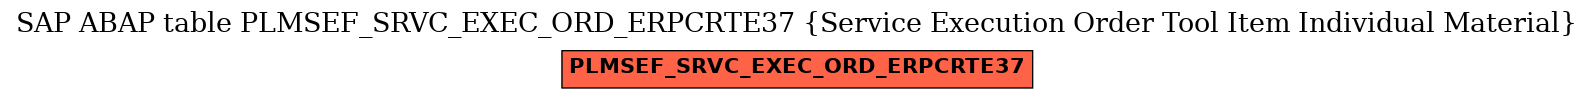 E-R Diagram for table PLMSEF_SRVC_EXEC_ORD_ERPCRTE37 (Service Execution Order Tool Item Individual Material)